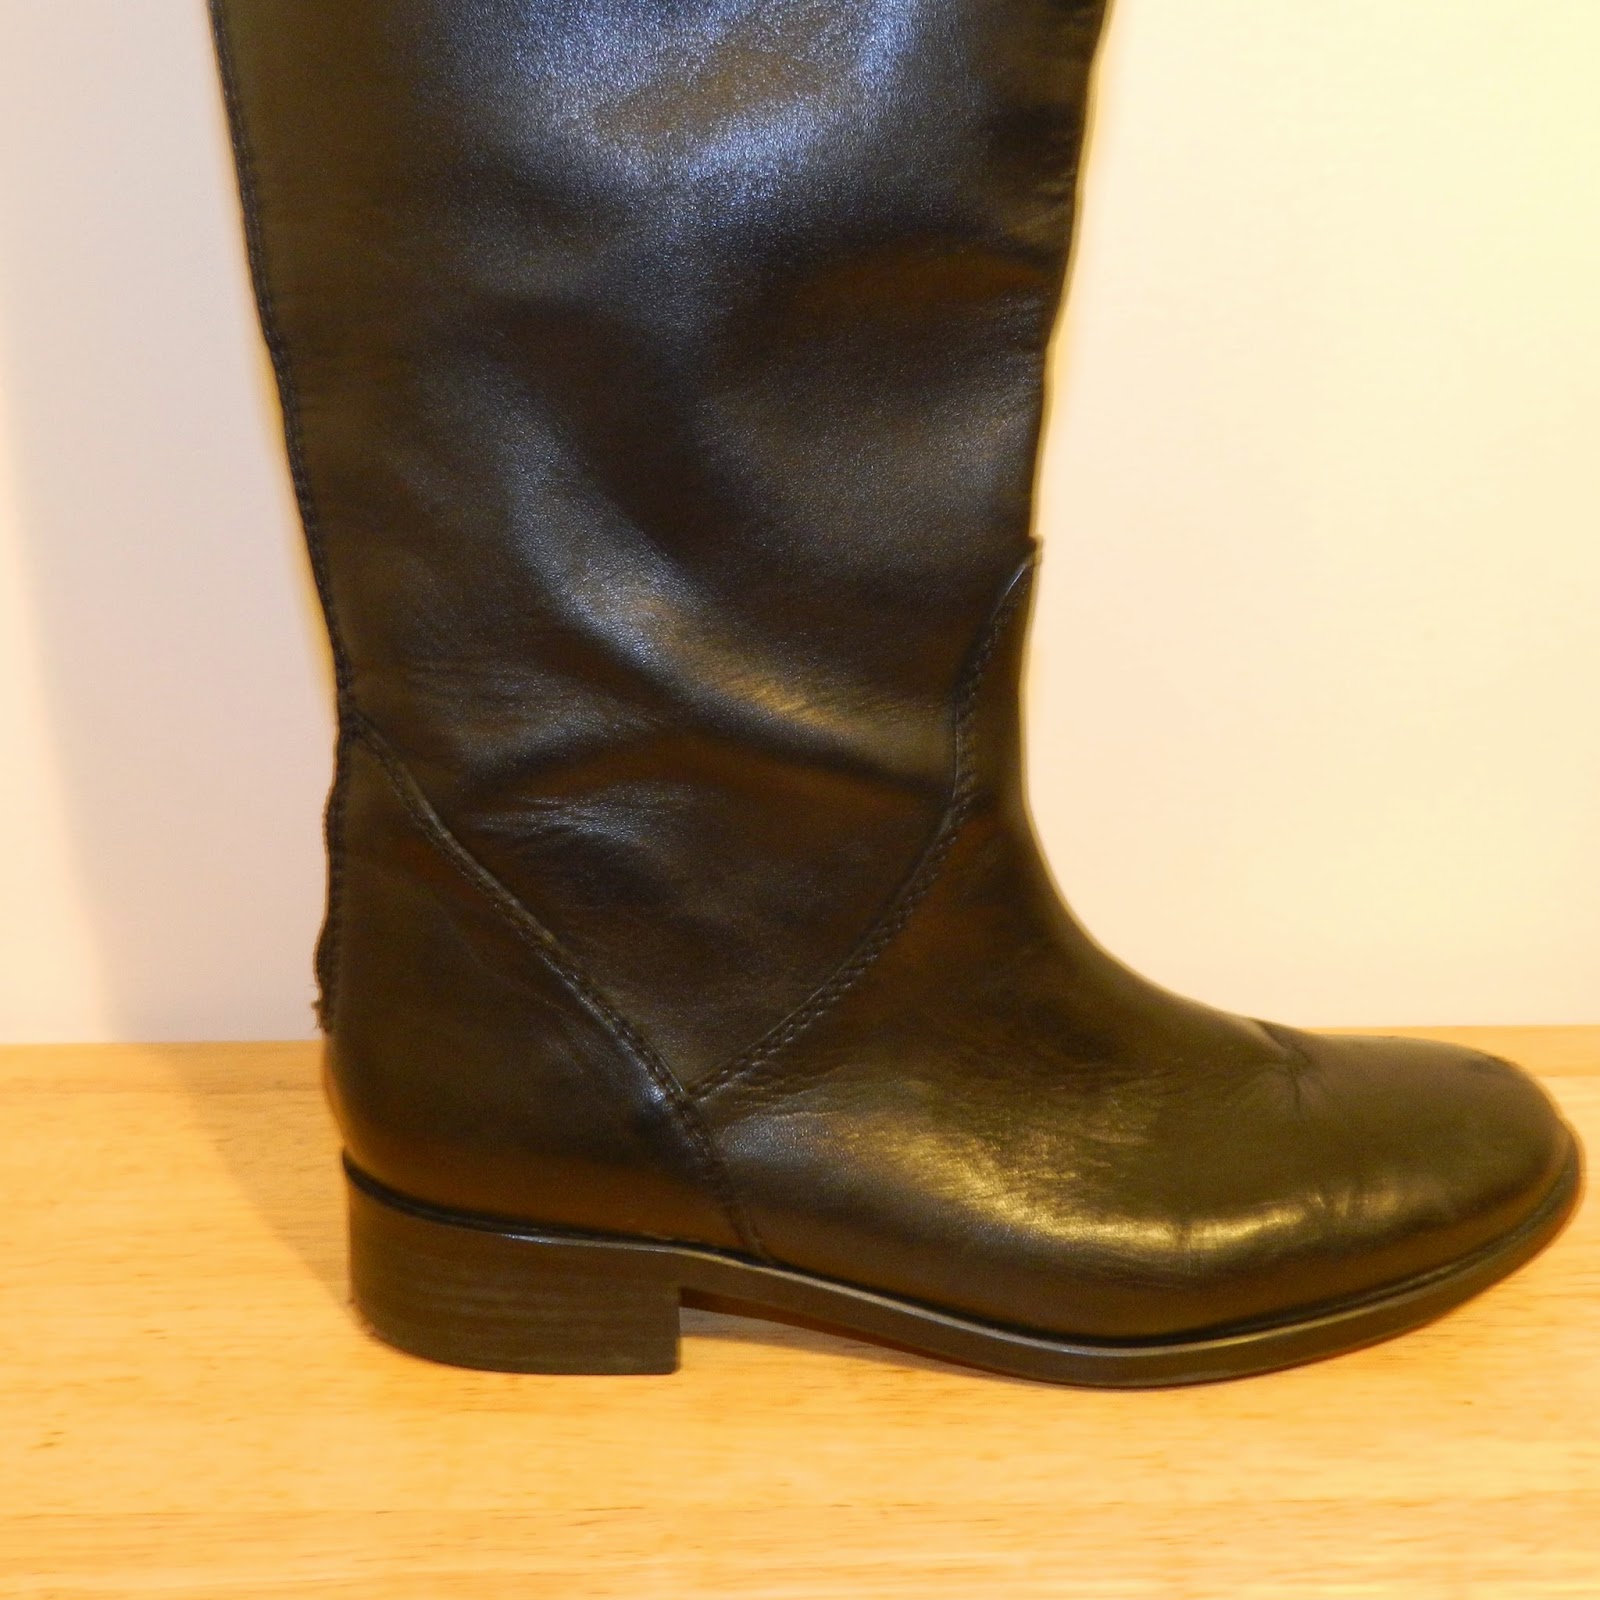 Thrift Haul Score of the Week: Steve Madden Riding Boots | Two Stylish Kays